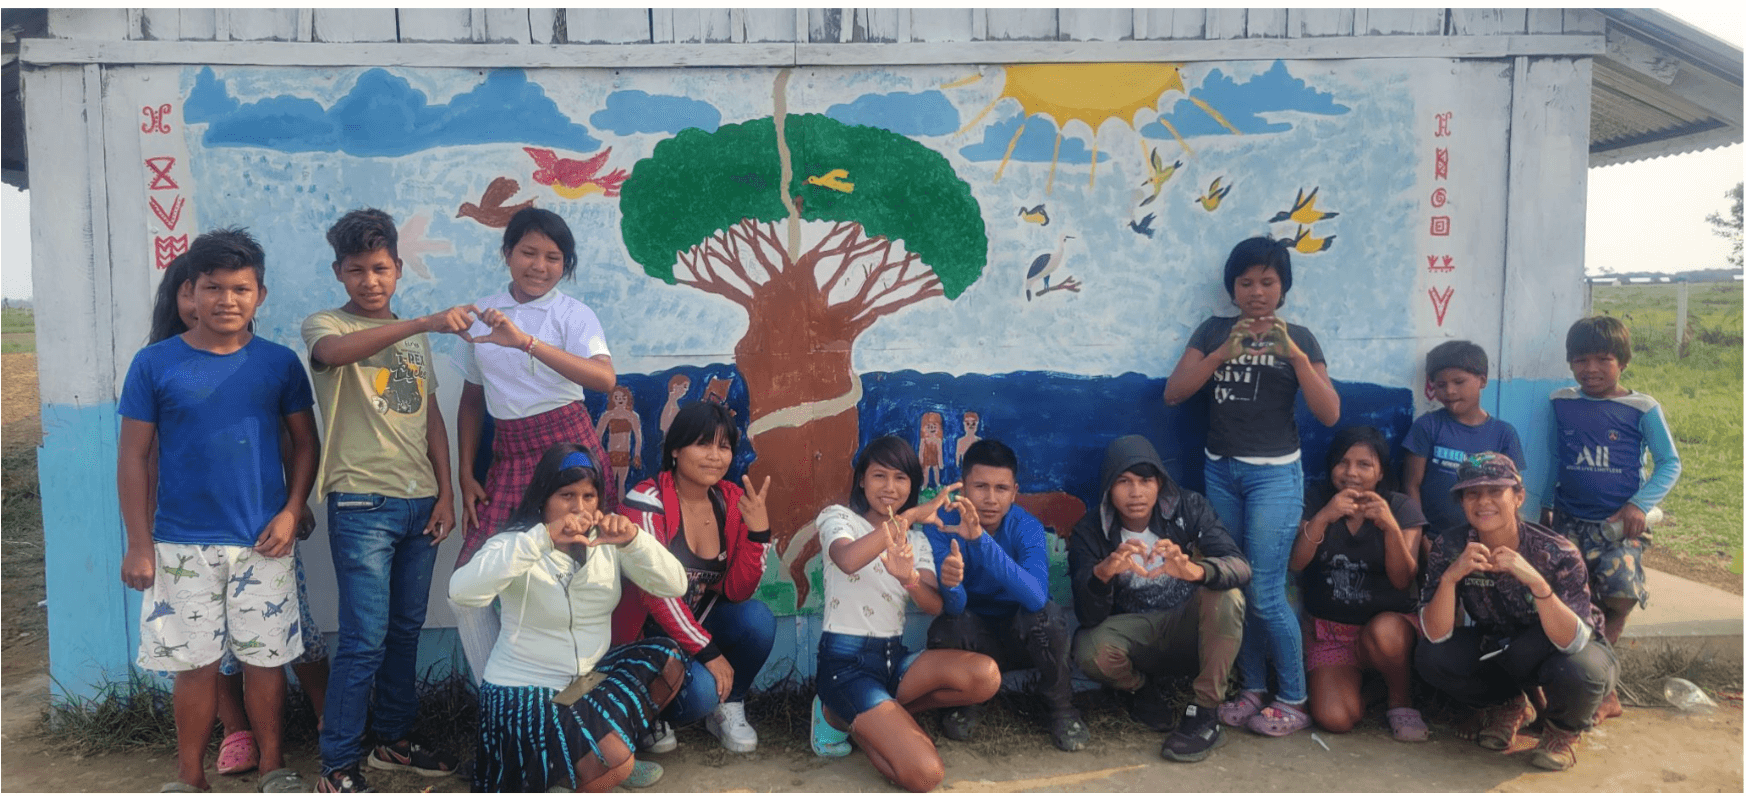 Indigenous Amazon Conservation: Mural Project with the Jiw Community